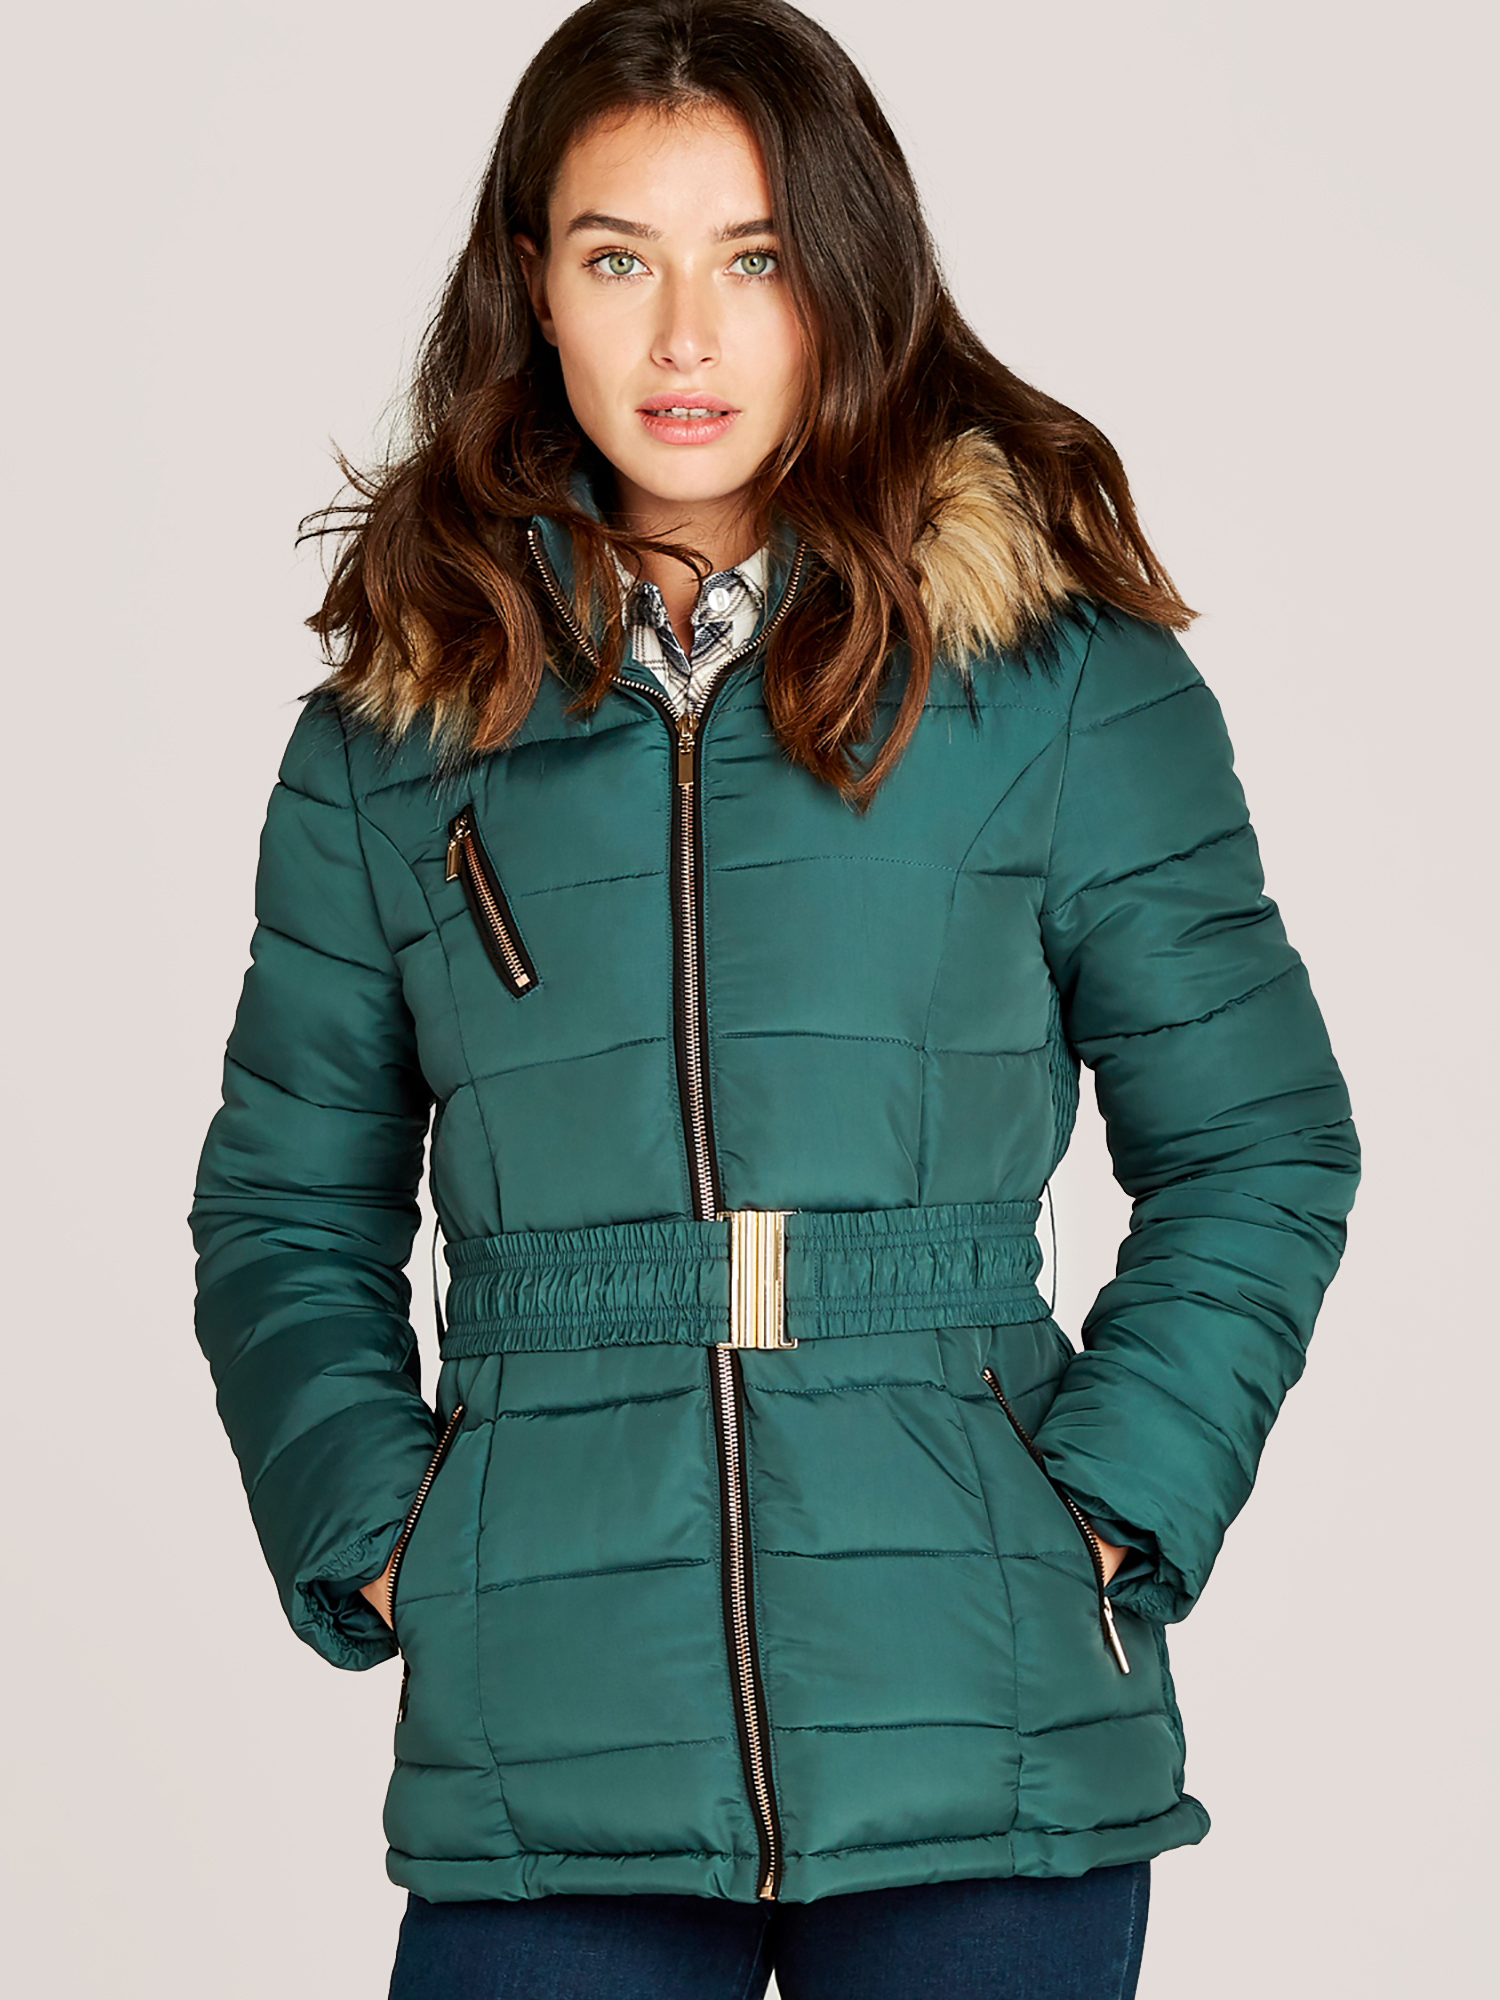 Removable Faux Fur Hood Puffer Jacket | Apricot Clothing